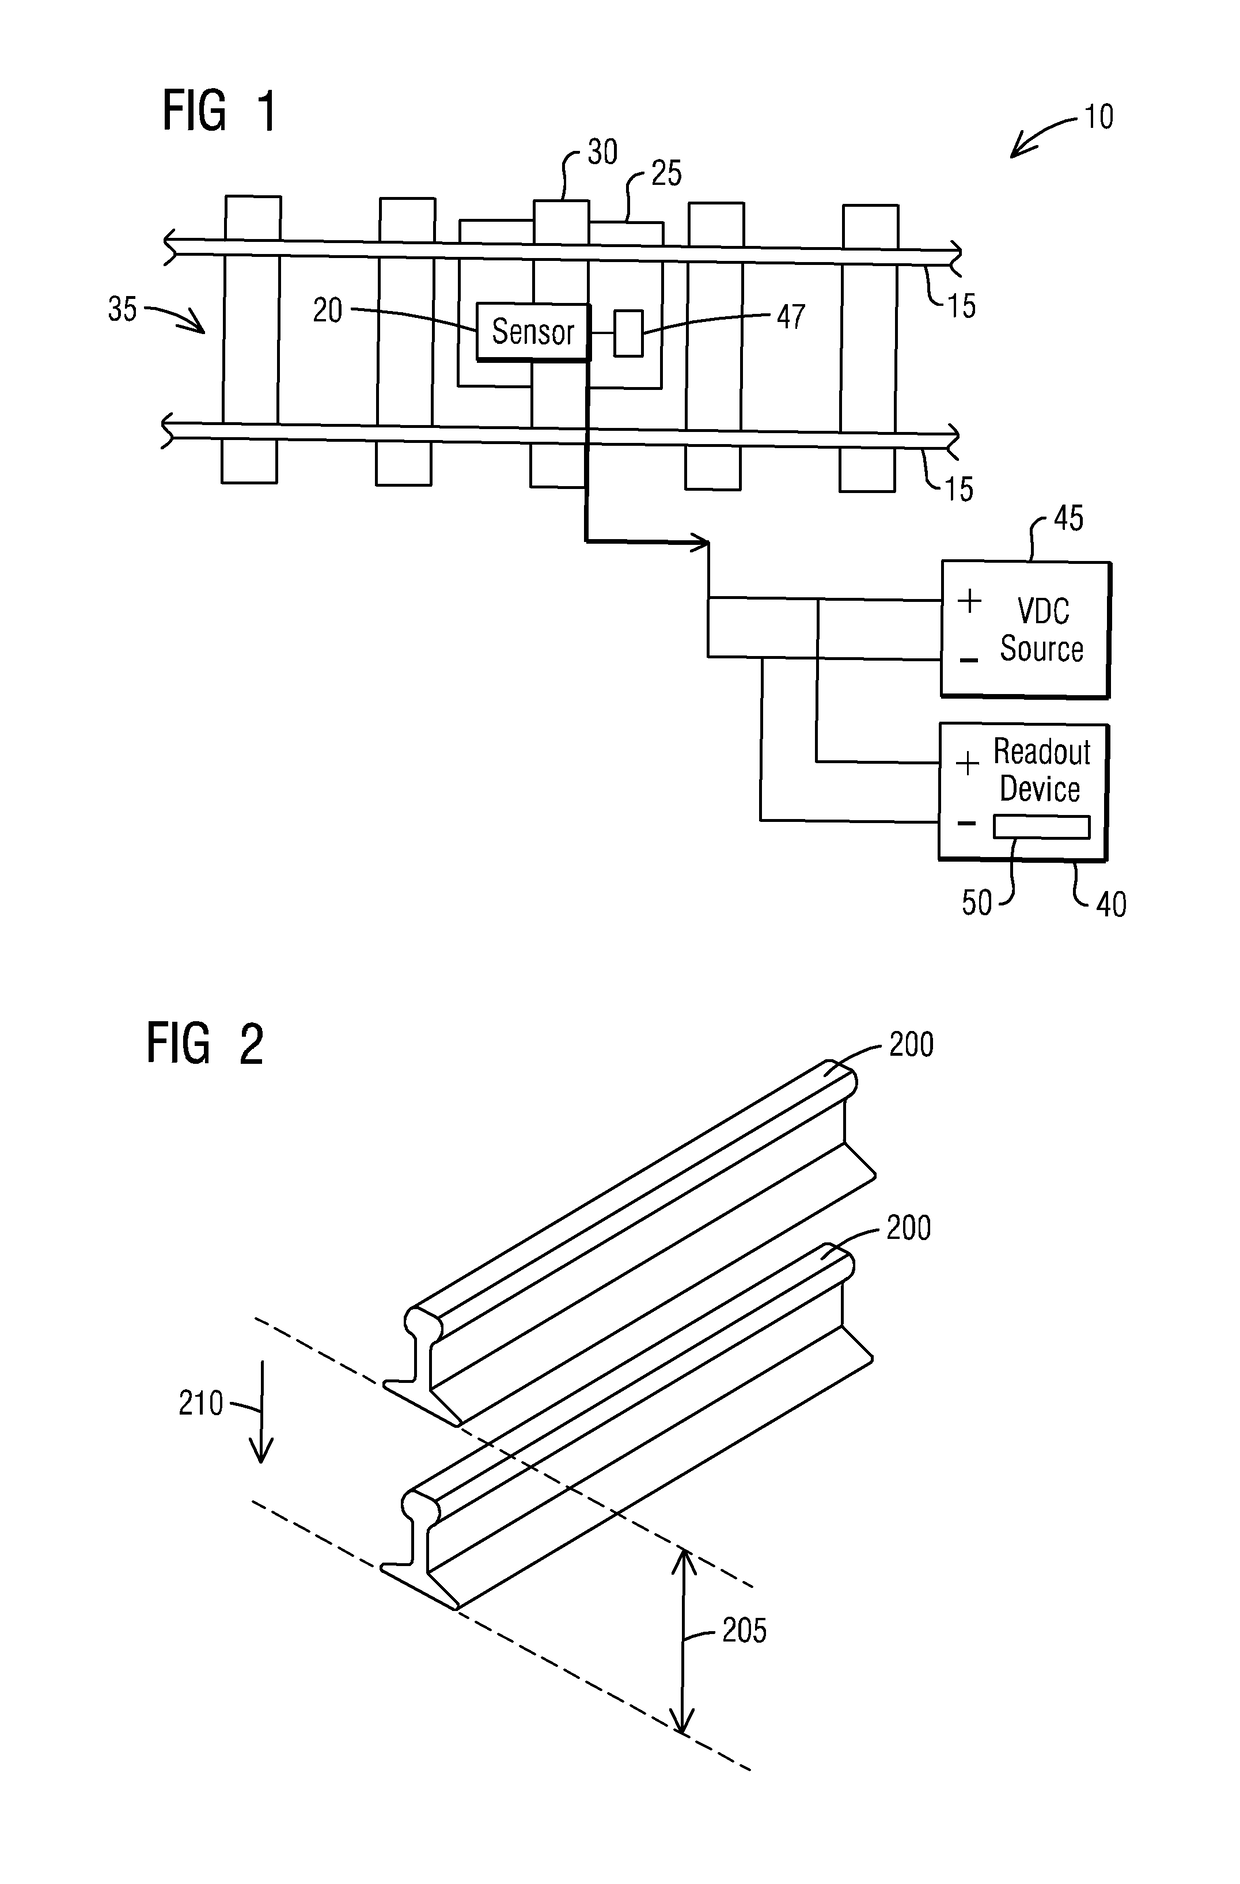 Railway track displacement measurement system and method for proactive maintenance